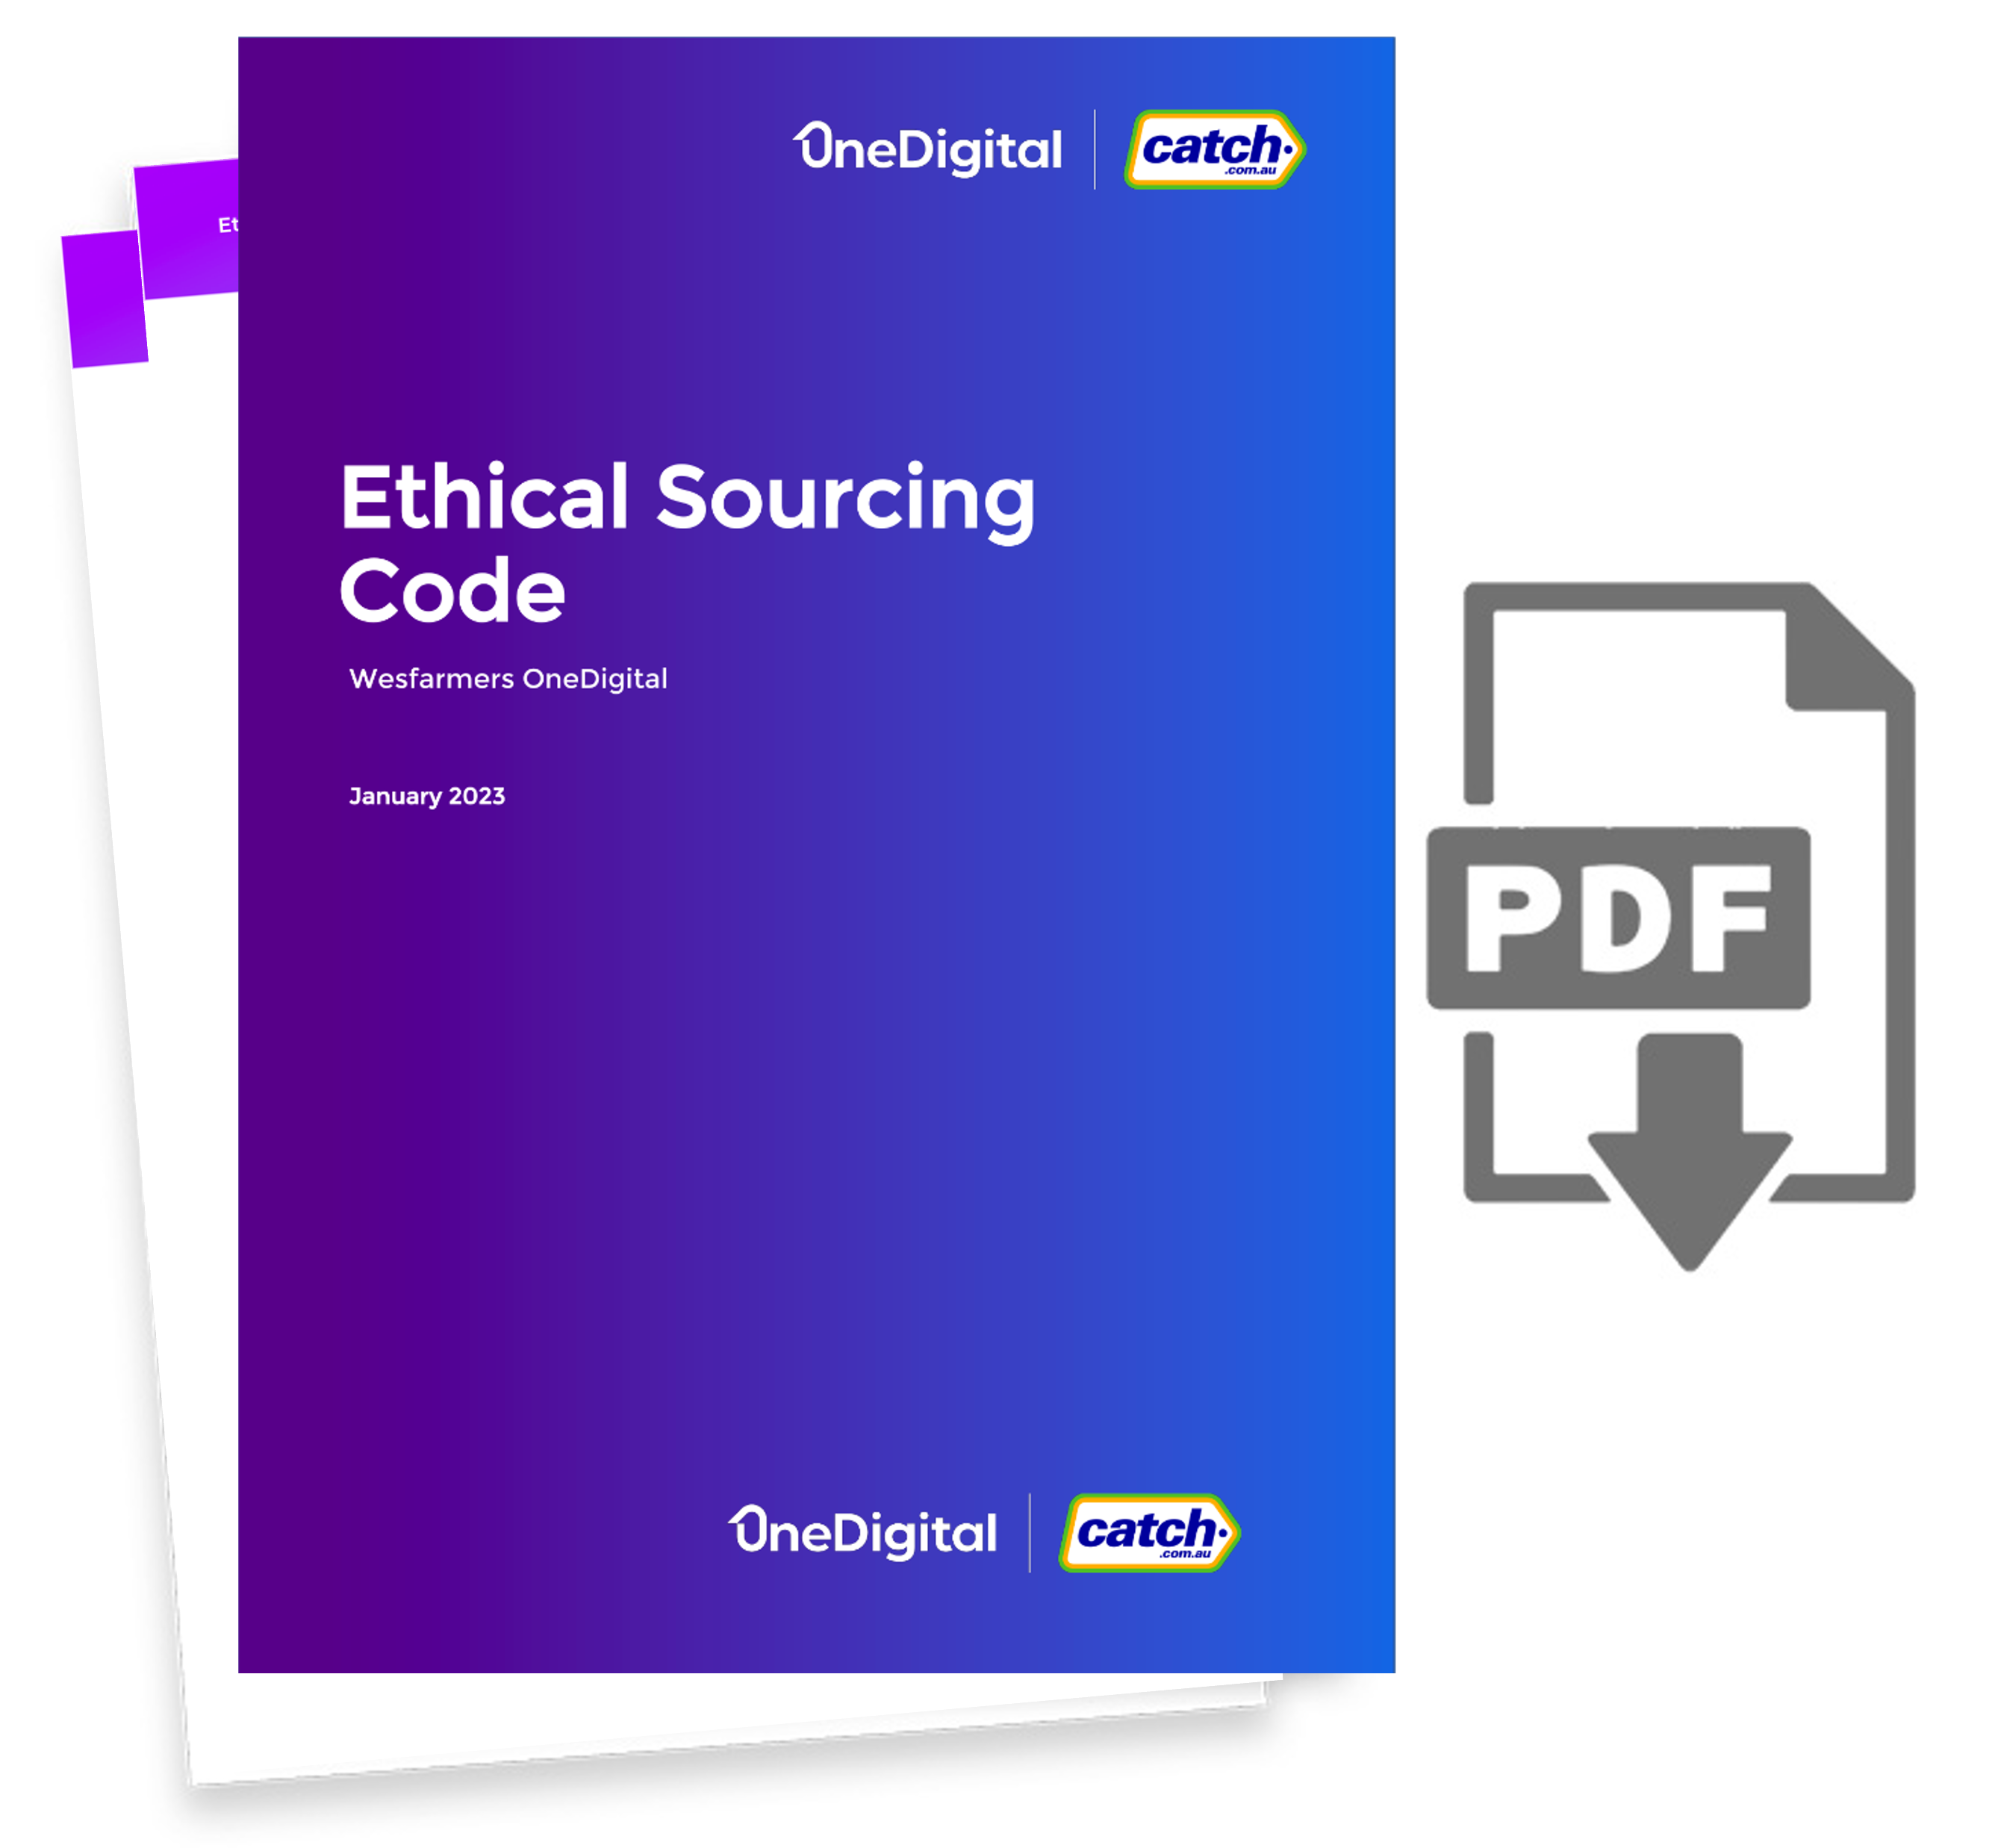 Download OneDigital Catch Ethical Sourcing Code